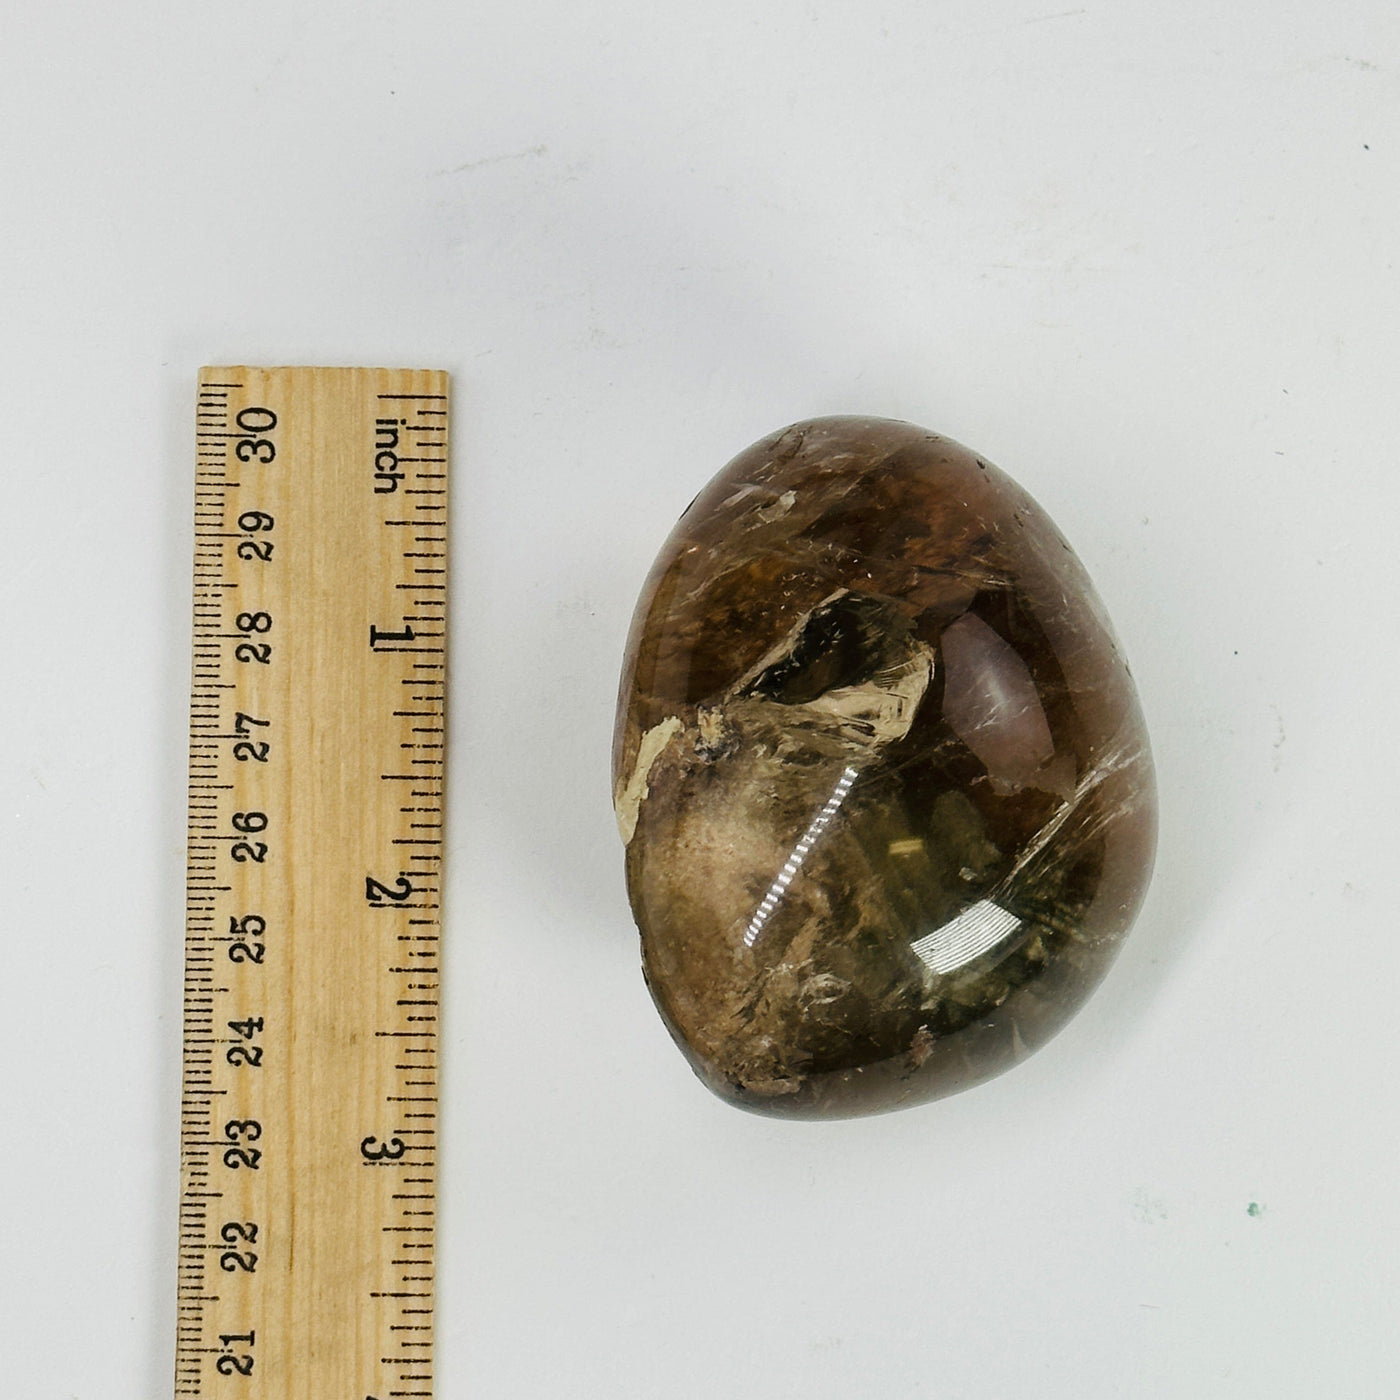 polished smokey quartz next to a ruler for size reference